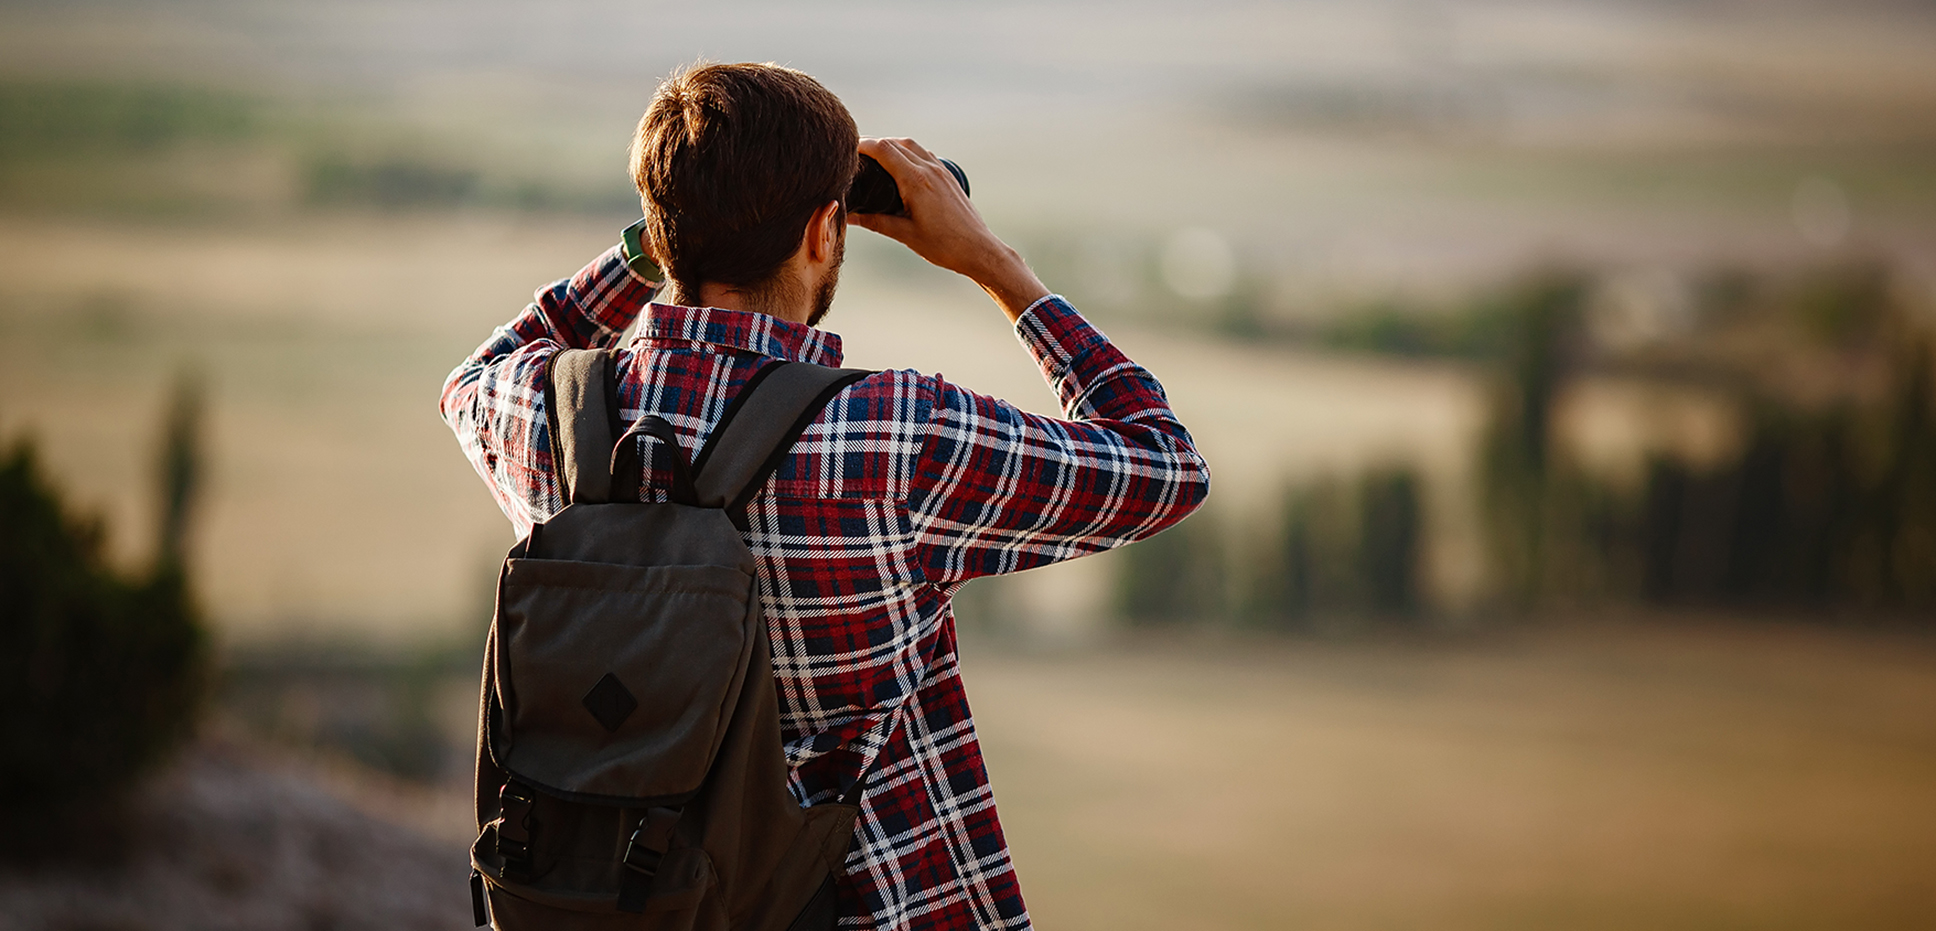 Man in plaid shirt with binoculars looks into the distance